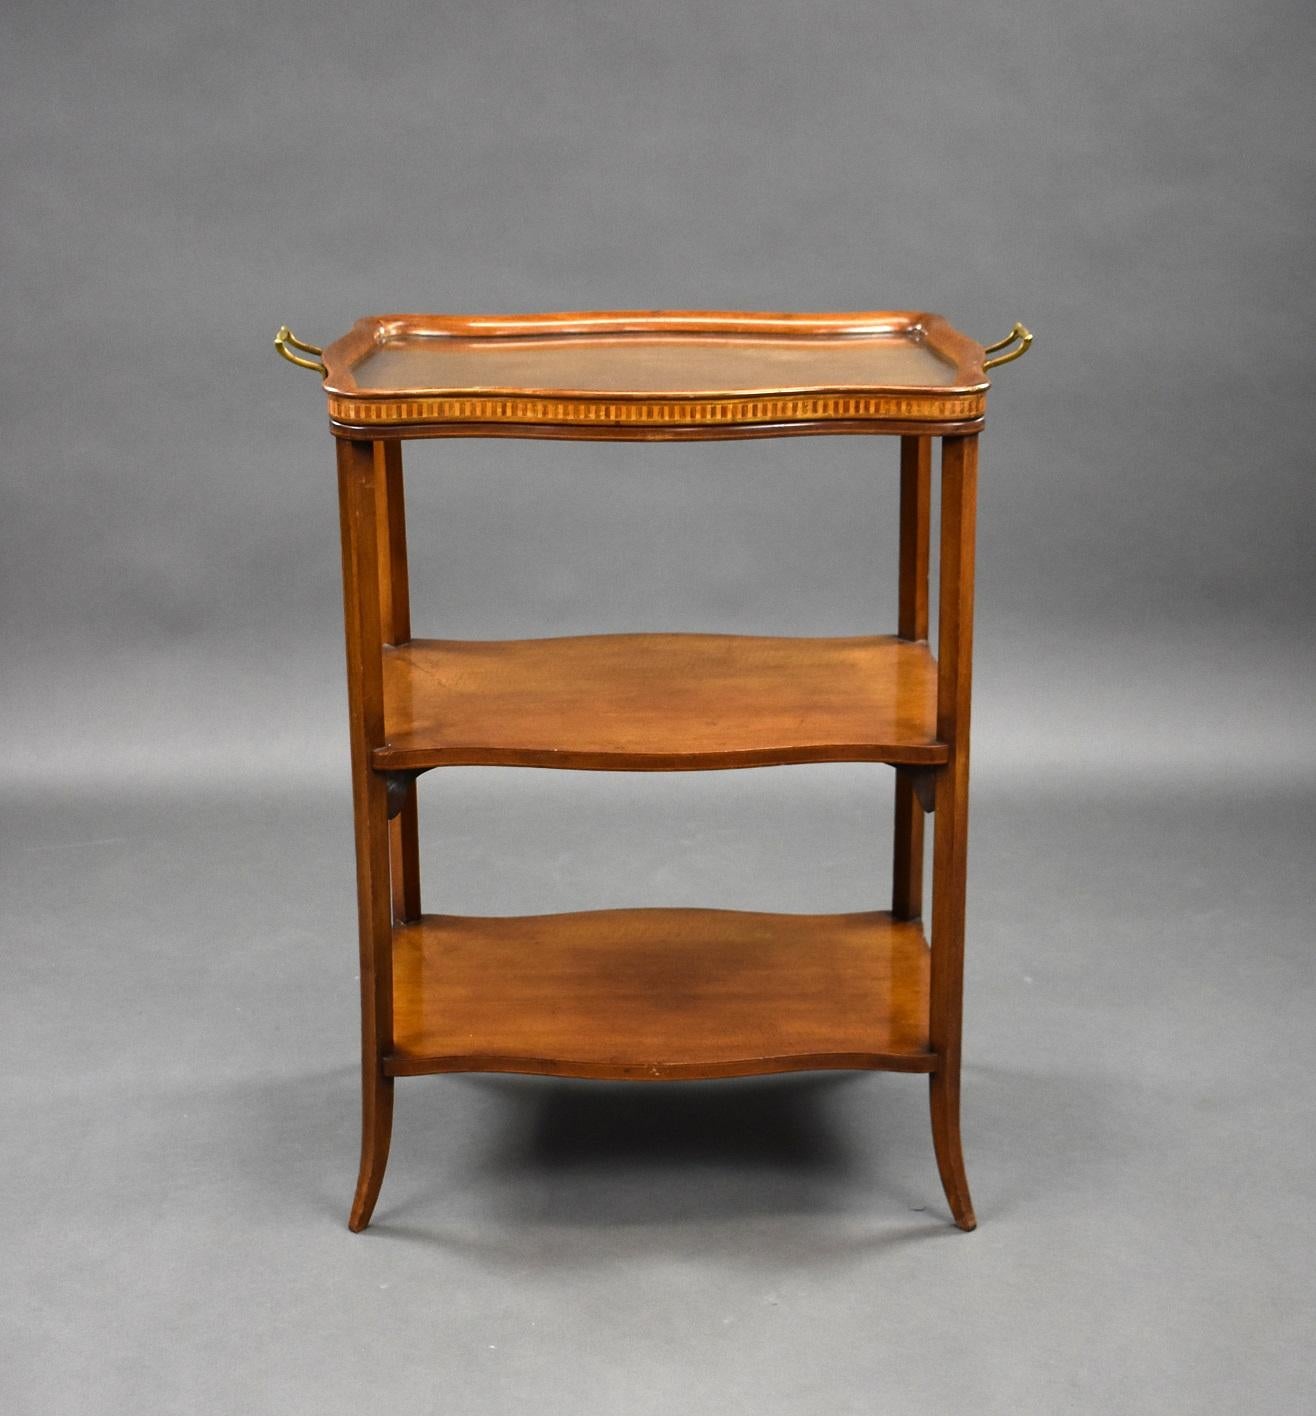 Offered for sale is this 1930s mahogany etagere with butlers tray. The etagere is free standing with a lift off glazed butlers tray to the top.